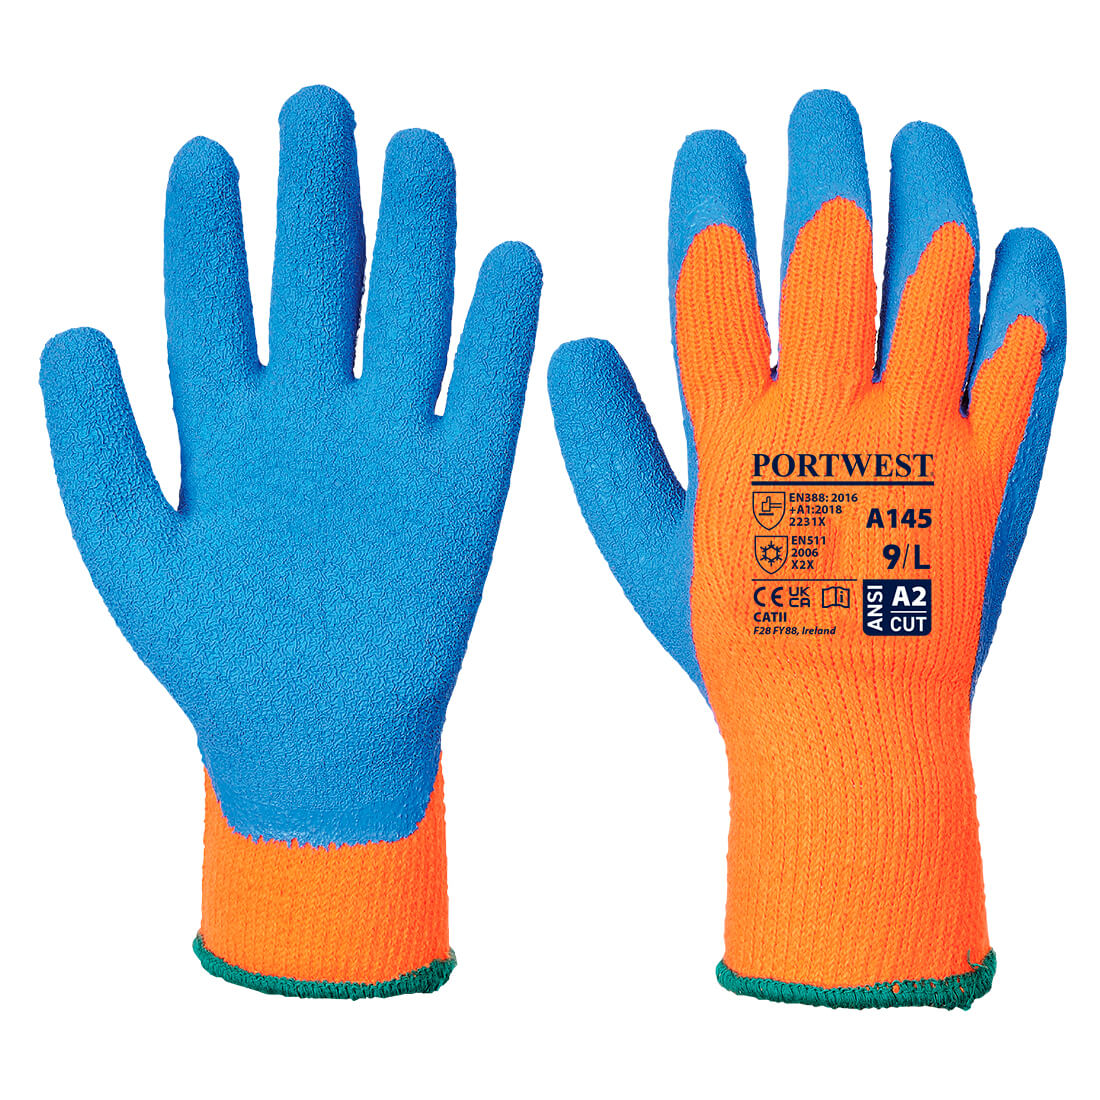 Portwest A145 Cold Grip Safety Working Gloves Latex 6,12,24 & 48 Pairs 